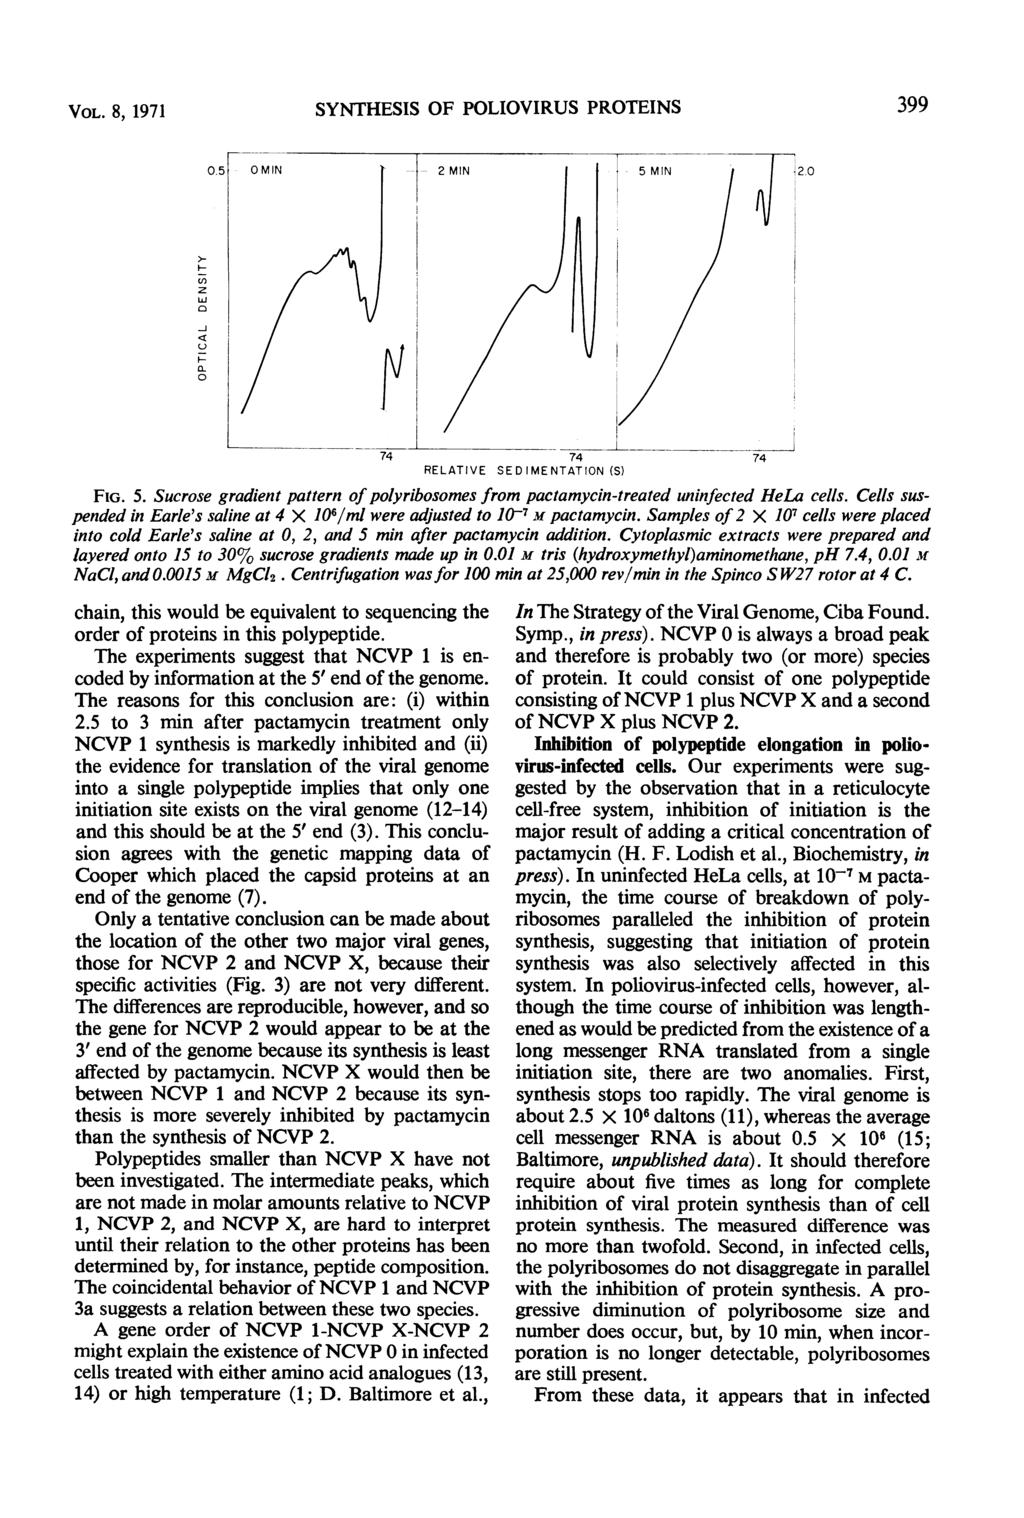 VOL. 8, 1971 SYNTHESIS OF POLIOVIRUS PROTEINS 399,2. -i Q- I- 74 RELATIVE SEDIMENTATION (S) FIG. 5. Sucrose gradient pattern of polyribosomes from pactamycin-treated uninfected HeLa cells.